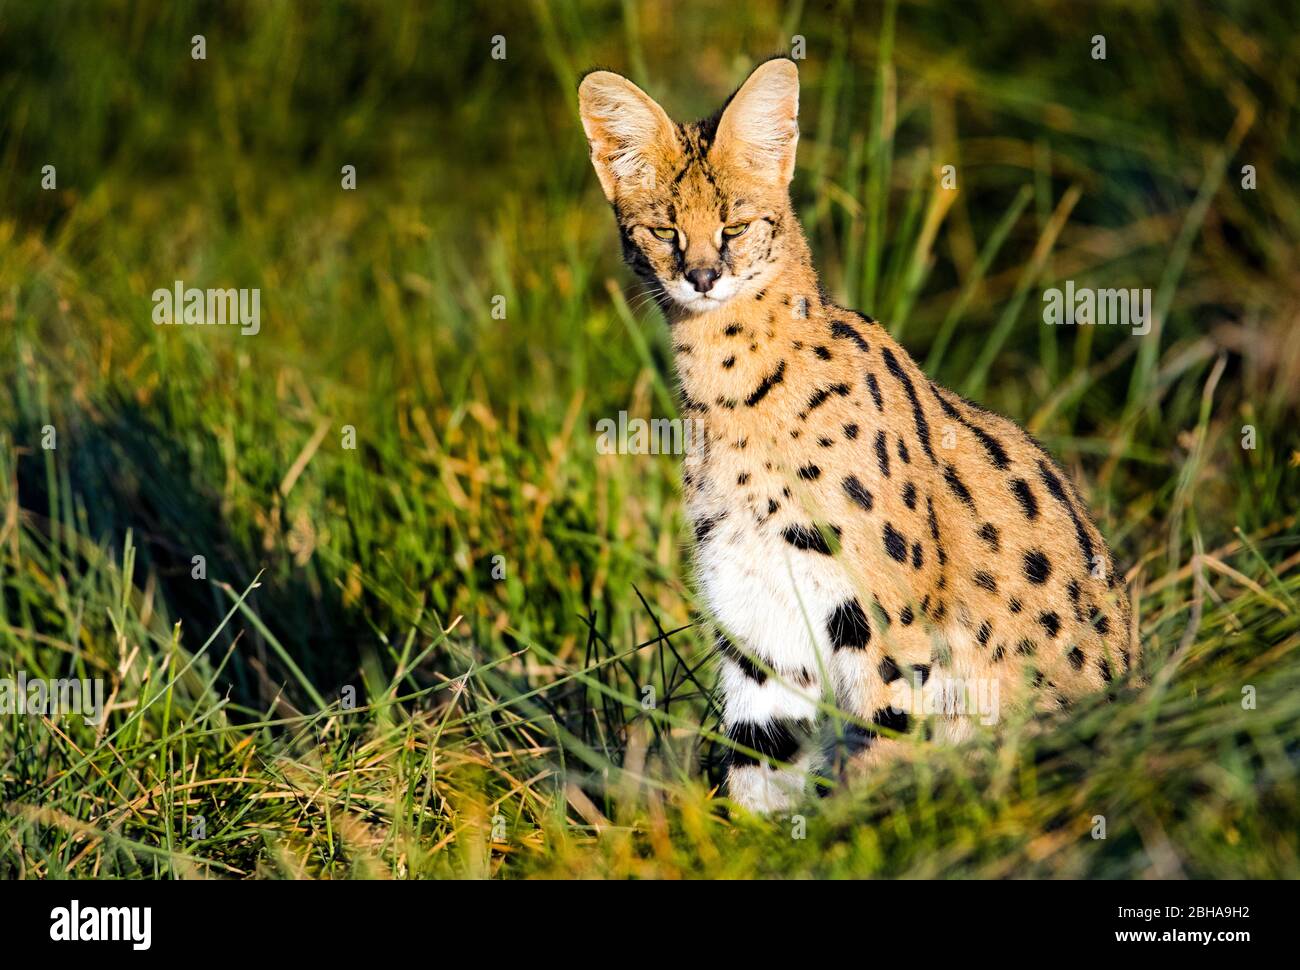 Serval (Leptailurus serval) looking at camera while sitting in grass, Ngorongoro Conservation Area, Tanzania Stock Photo